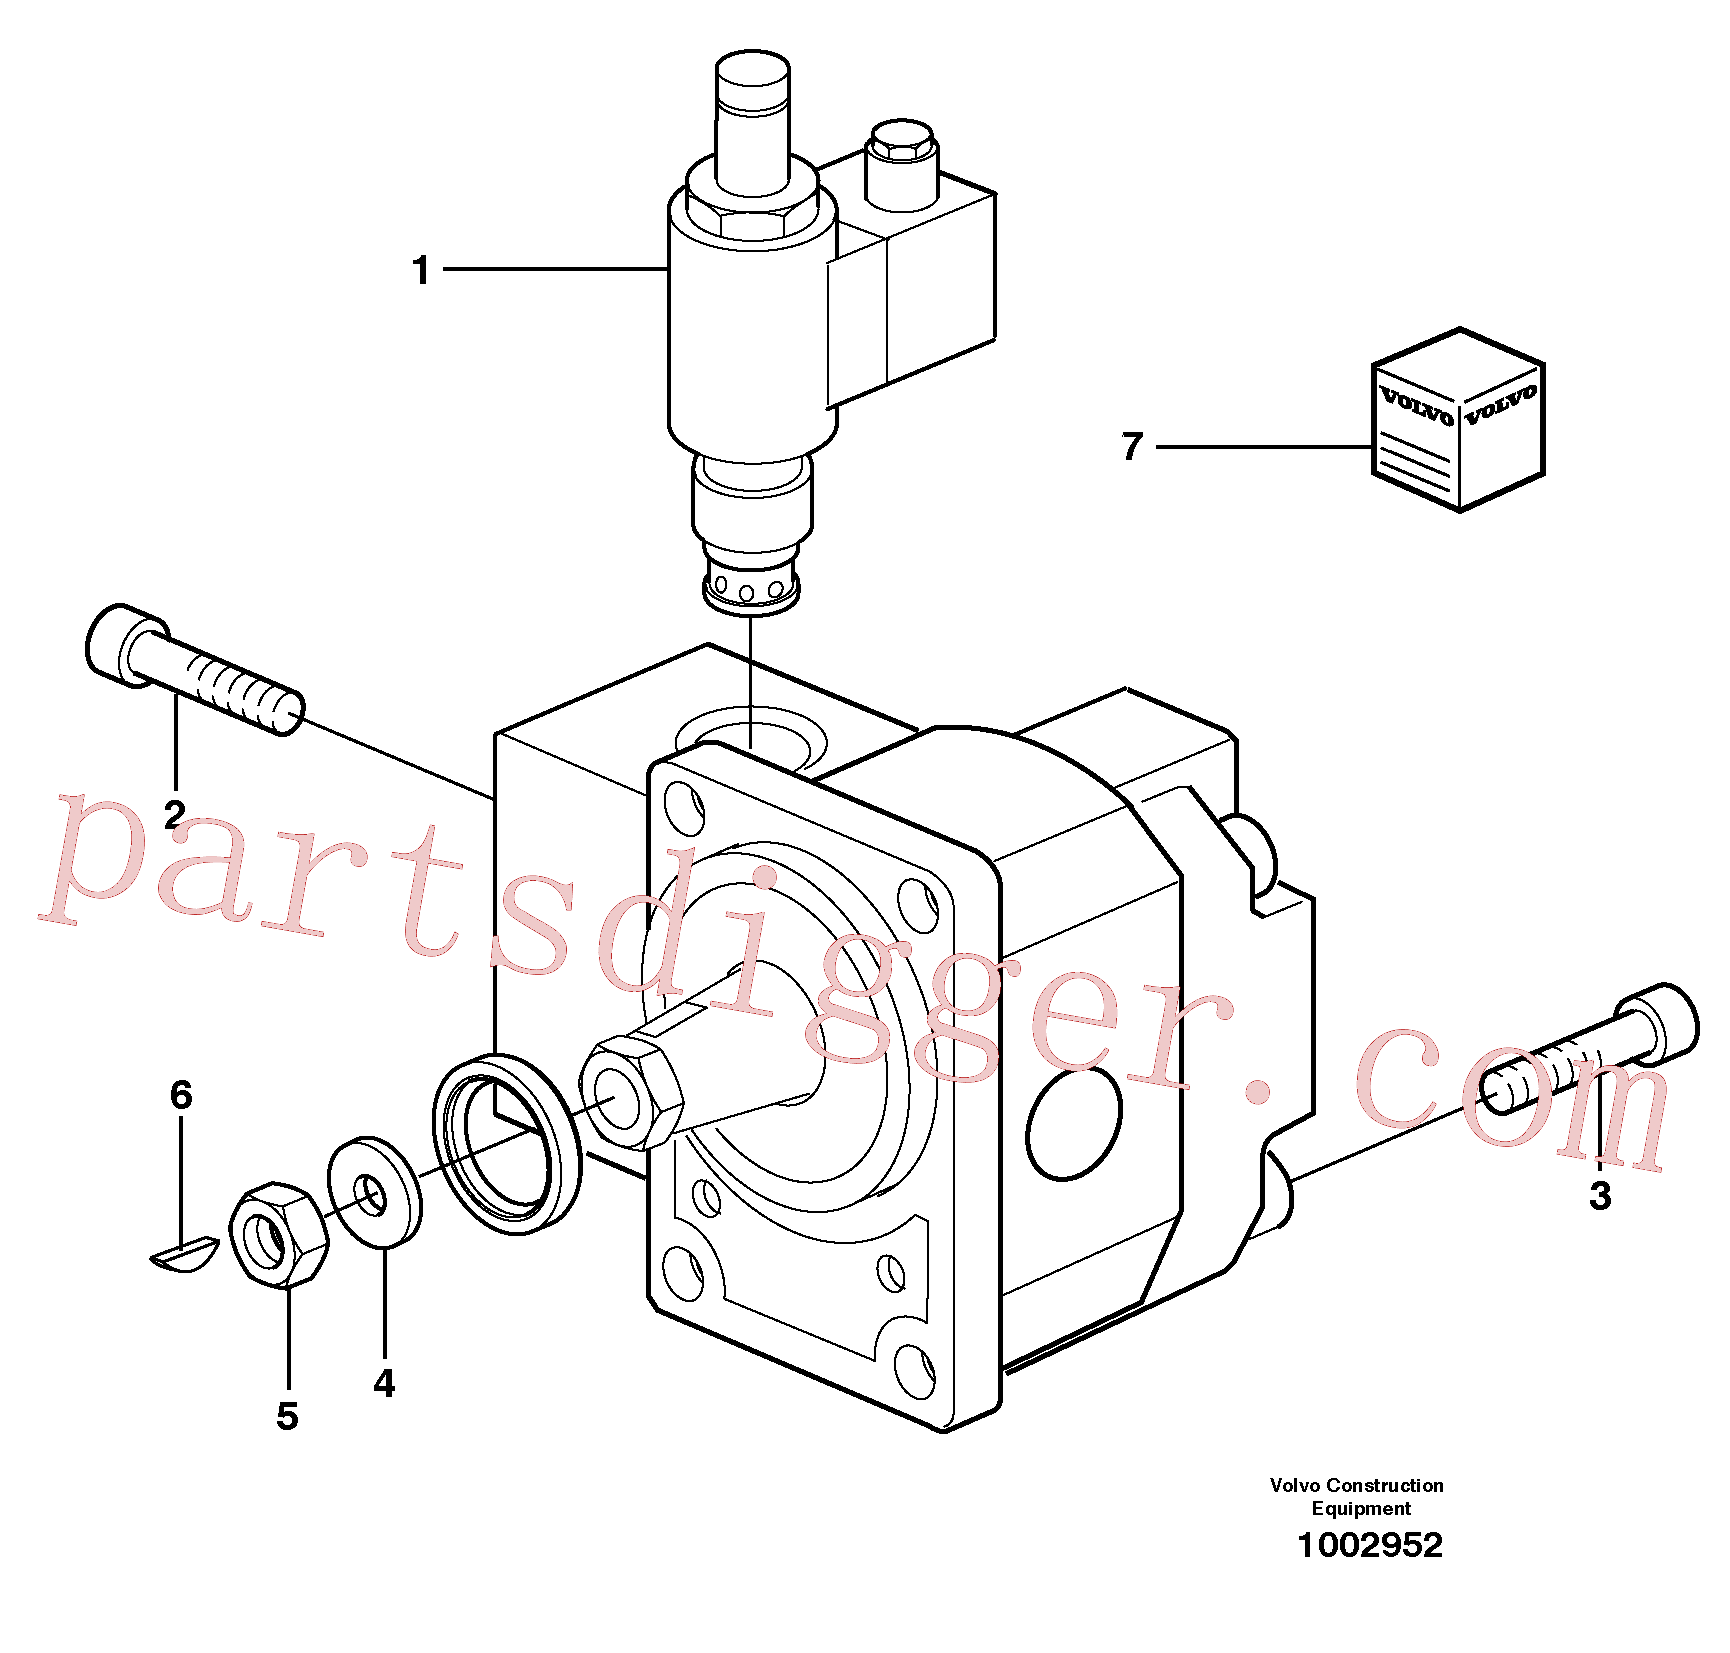 SA9213-14000 for Volvo Hydraulic motor(1002952 assembly)